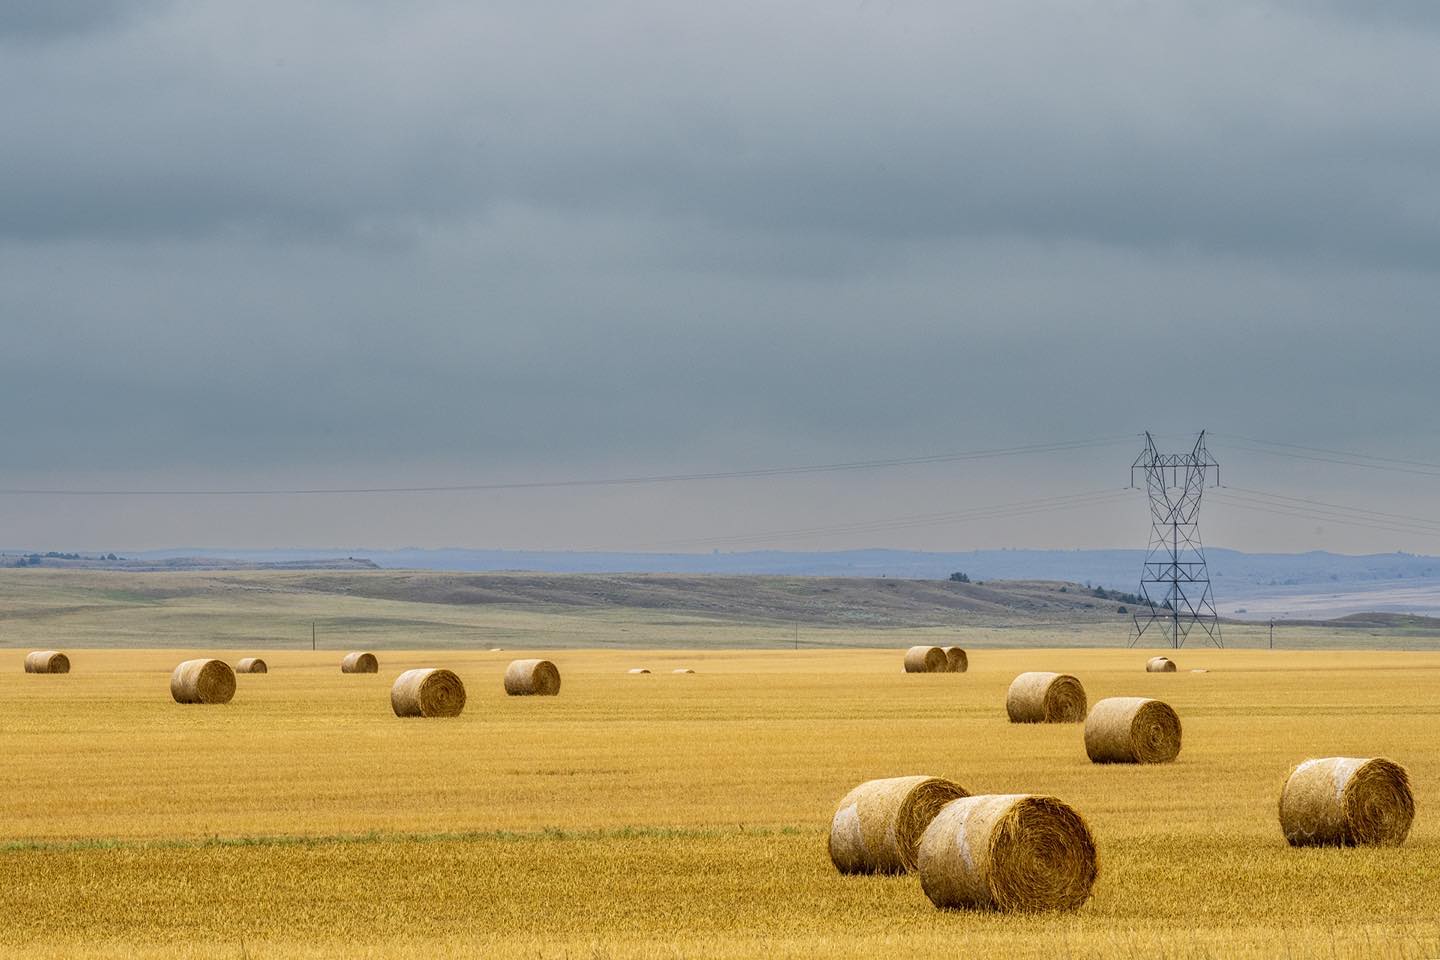 Hay rolls and a power line tower in Hathaway, Montana articulate the agricultural landscape in eastern Montana. The man-made objects are symbols of the economy in the Northern Great Plains. #hayrolls #hathawaymontana #northerngreatplains #montanaphotography